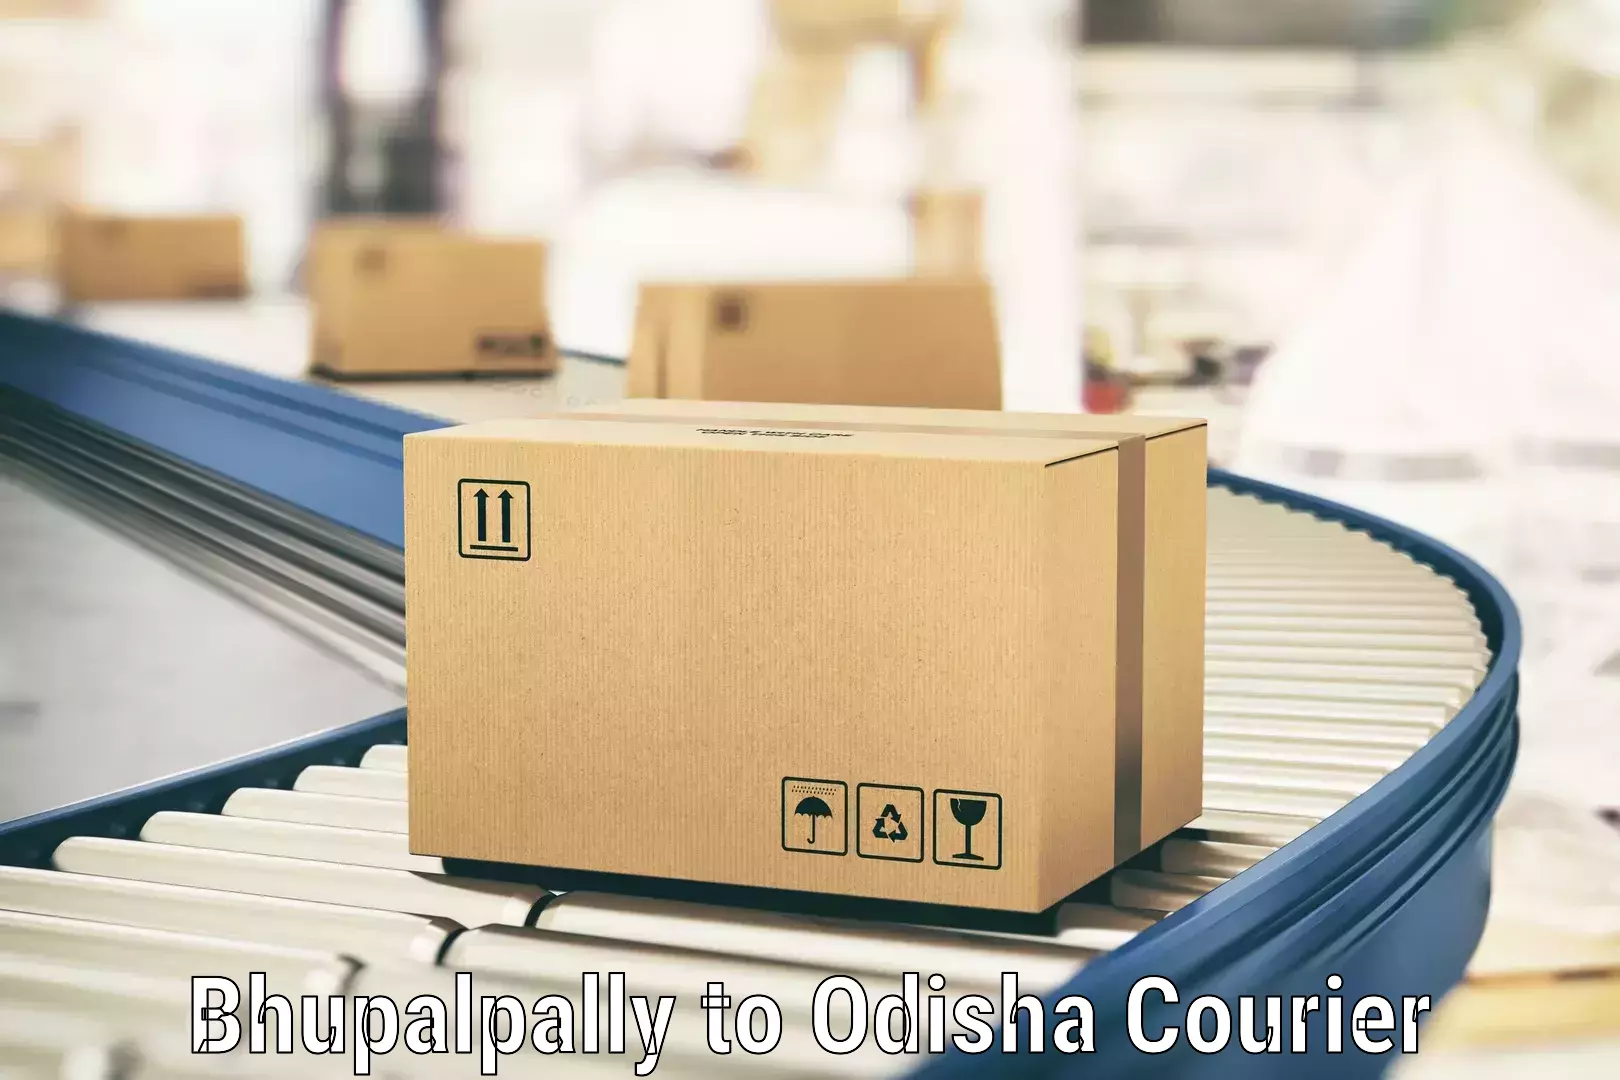 Round-the-clock parcel delivery Bhupalpally to Jashipur